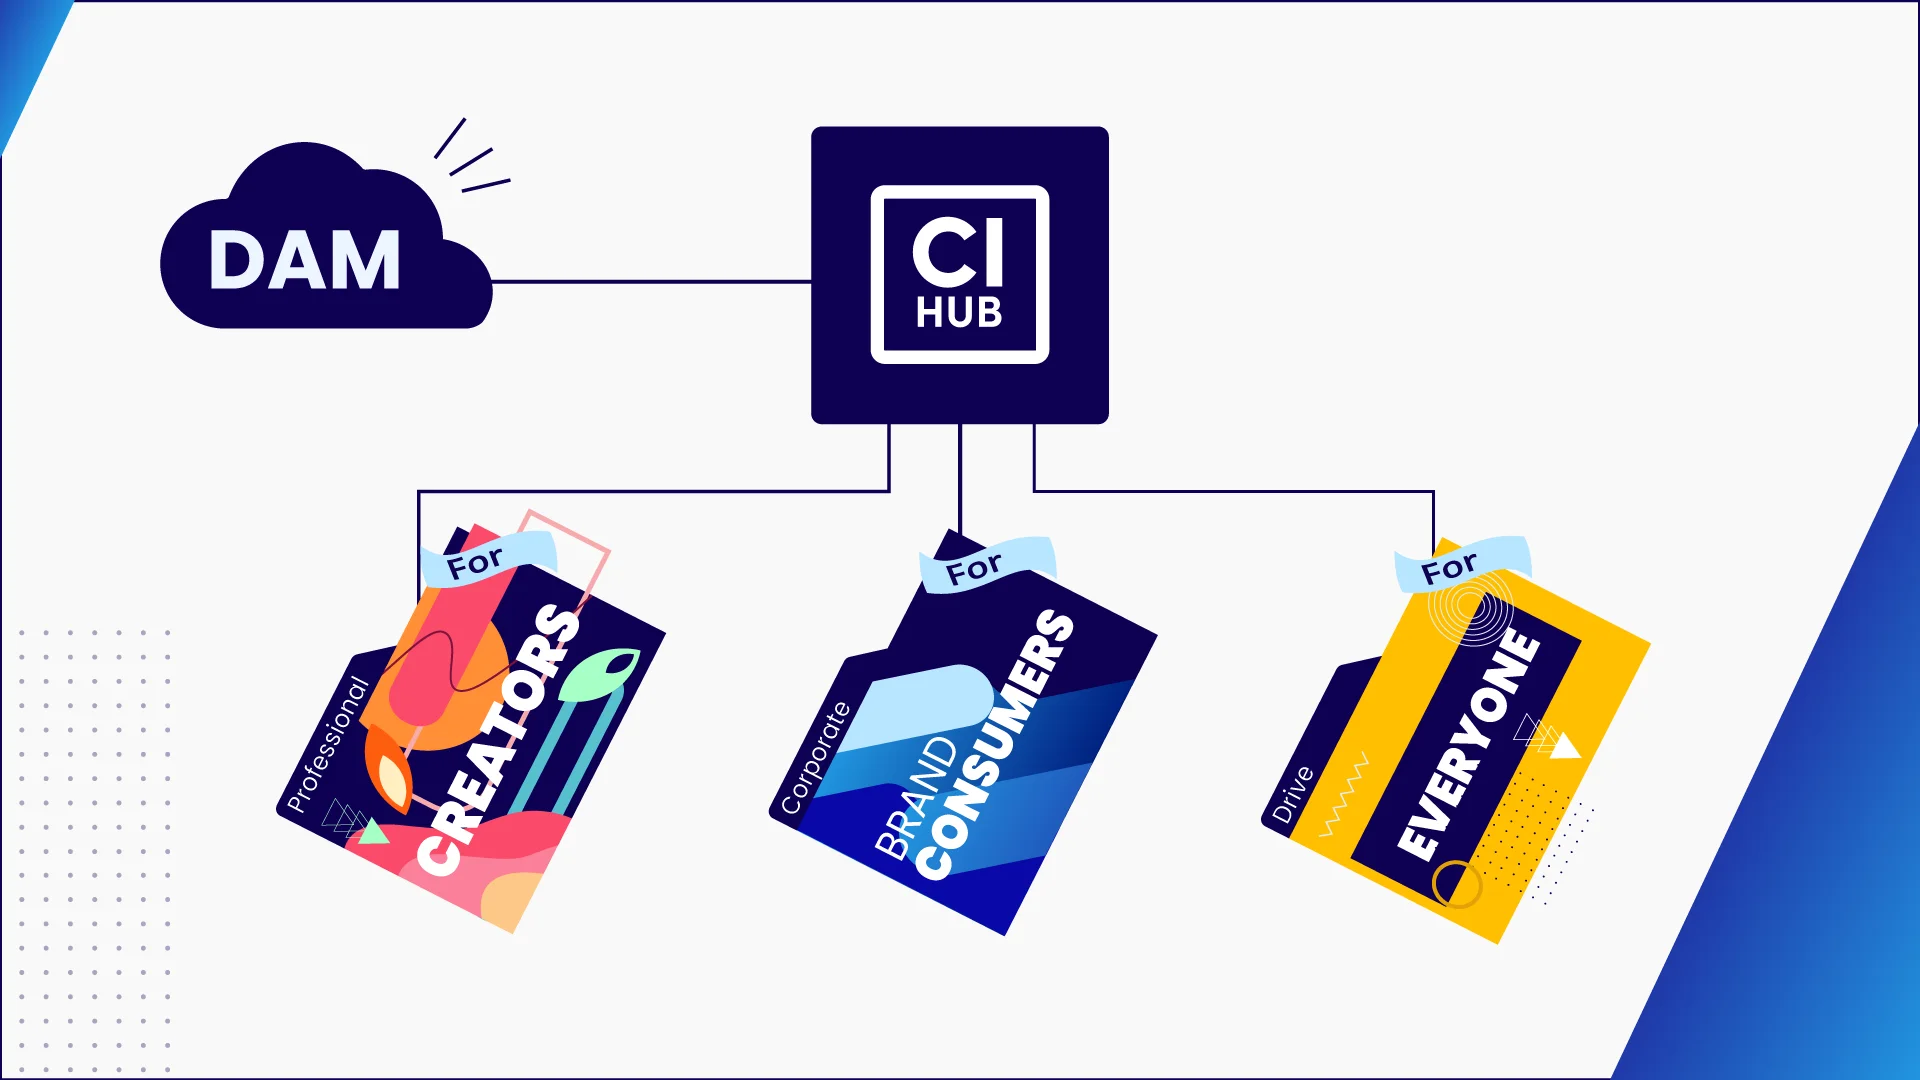 CI HUB Product family banner picture